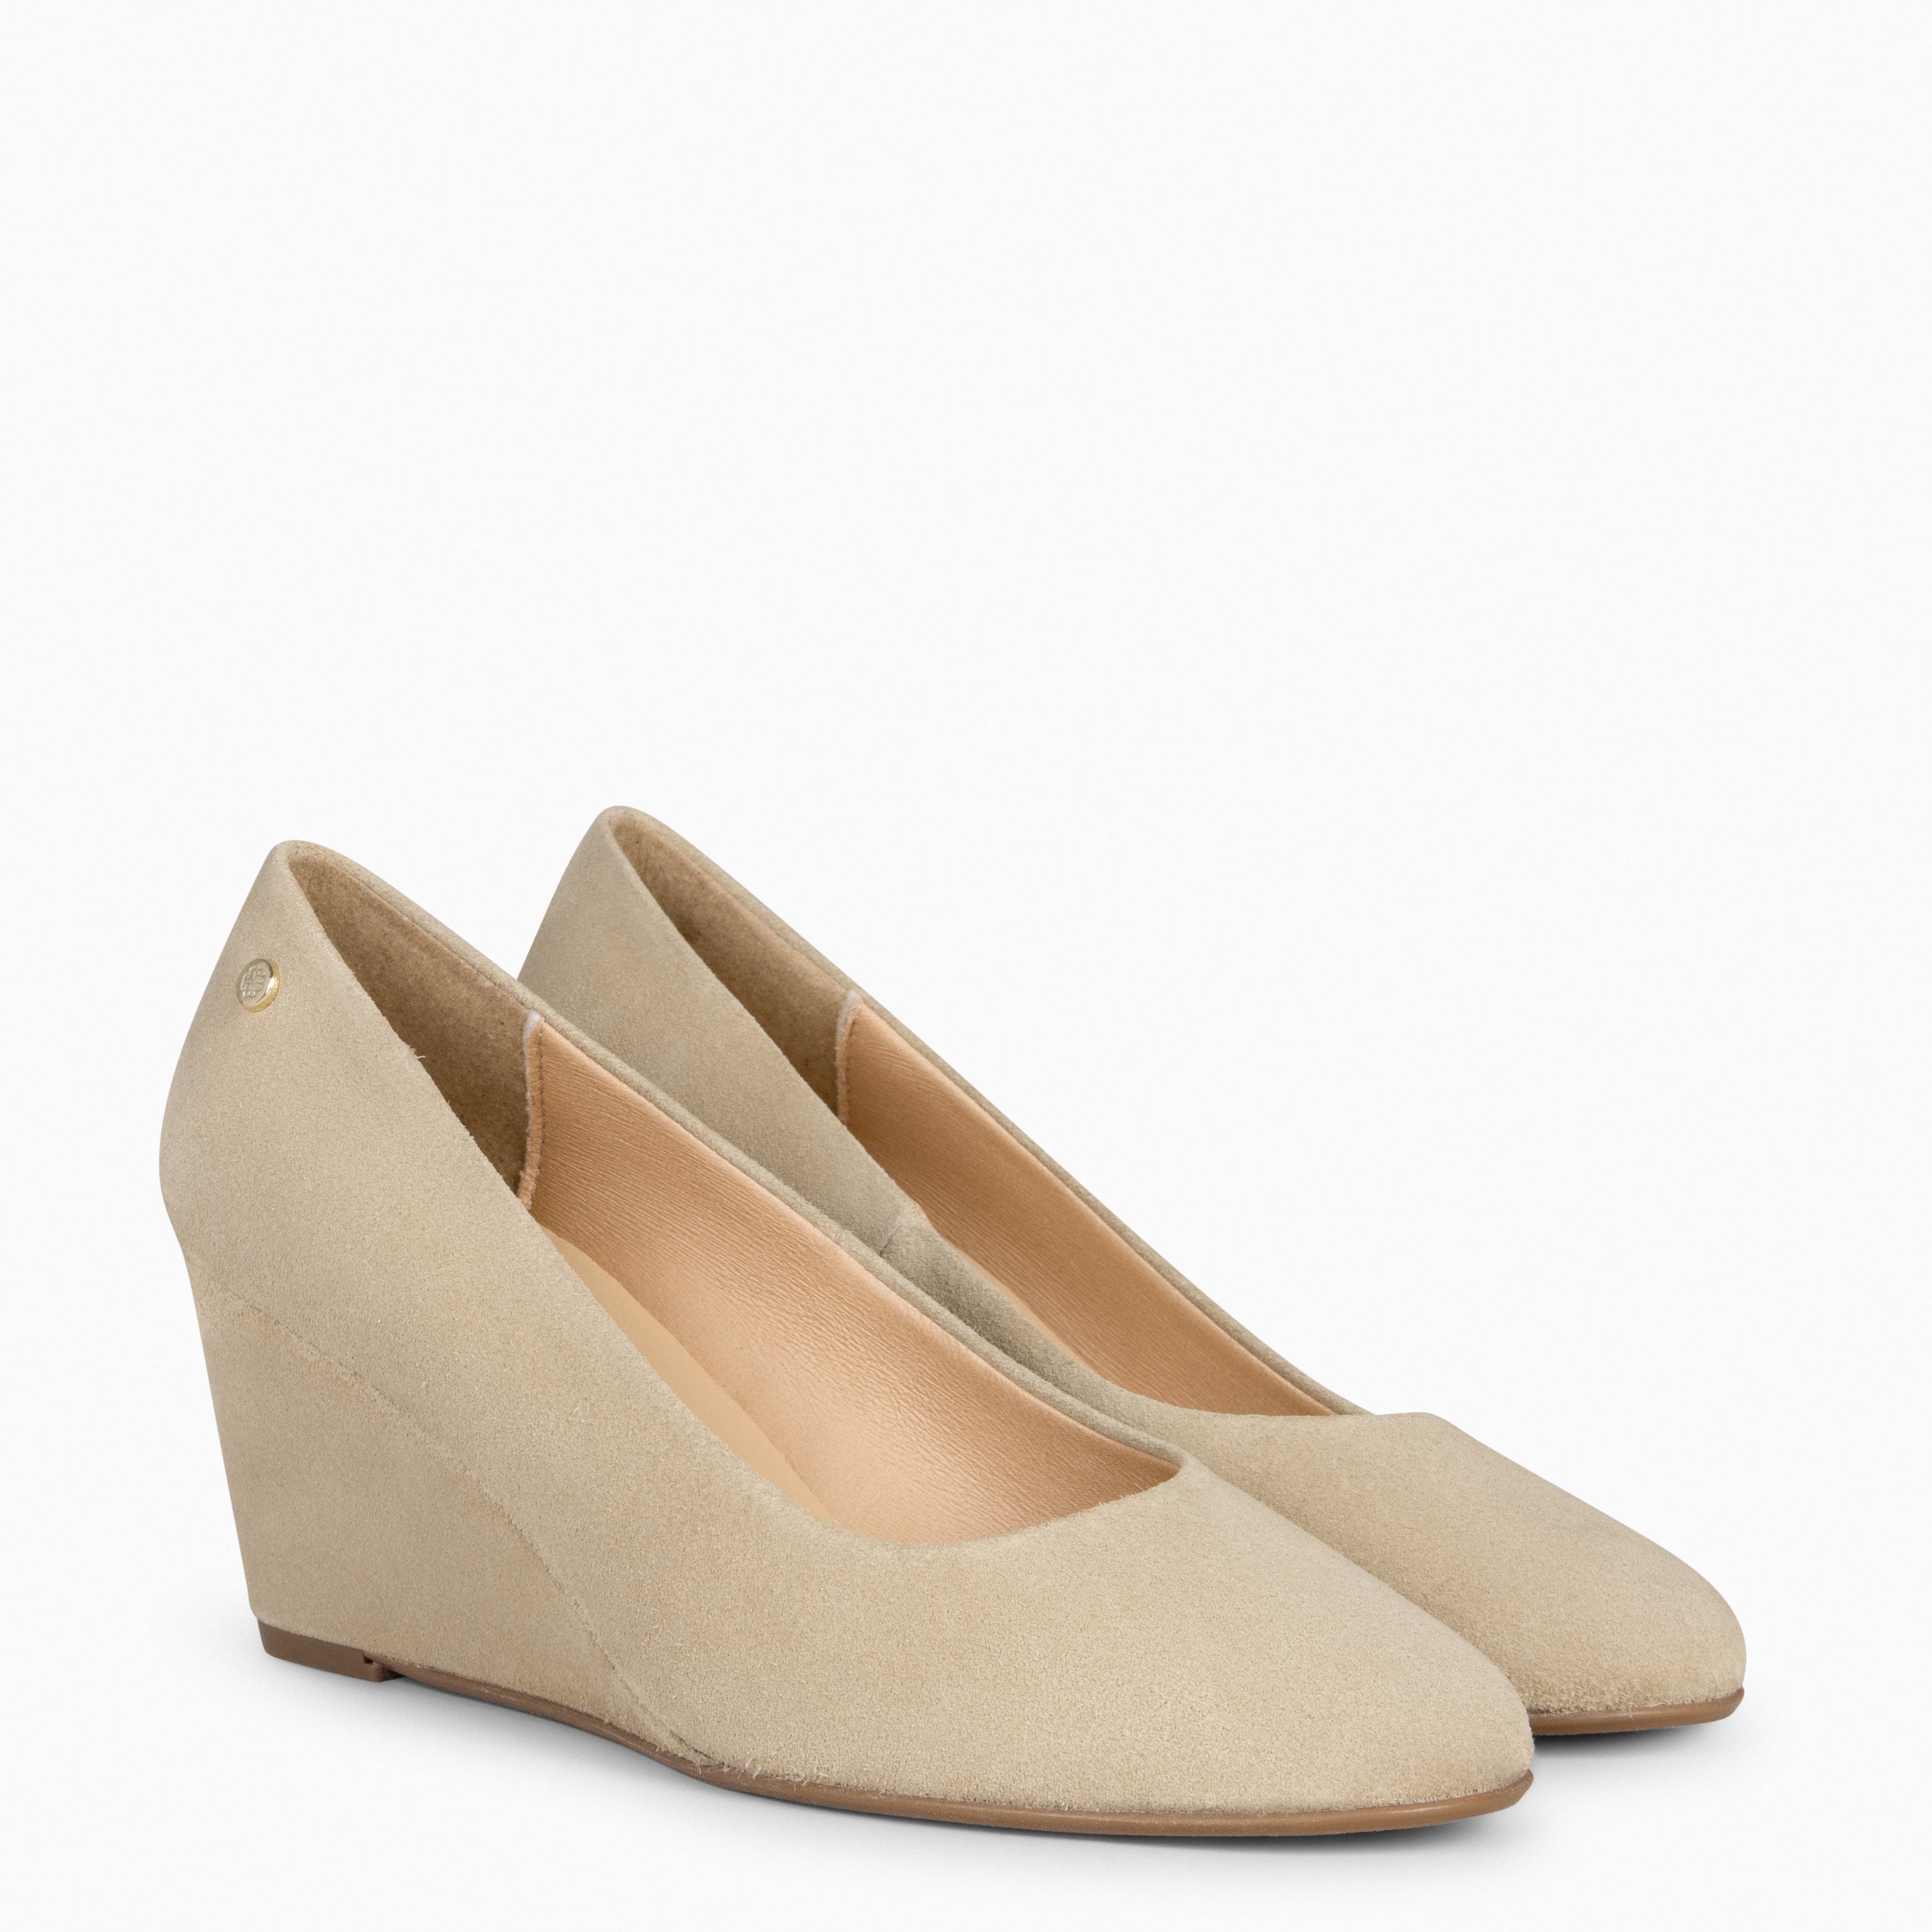 WEDGE ROUND – SAND Shoes with wedge 